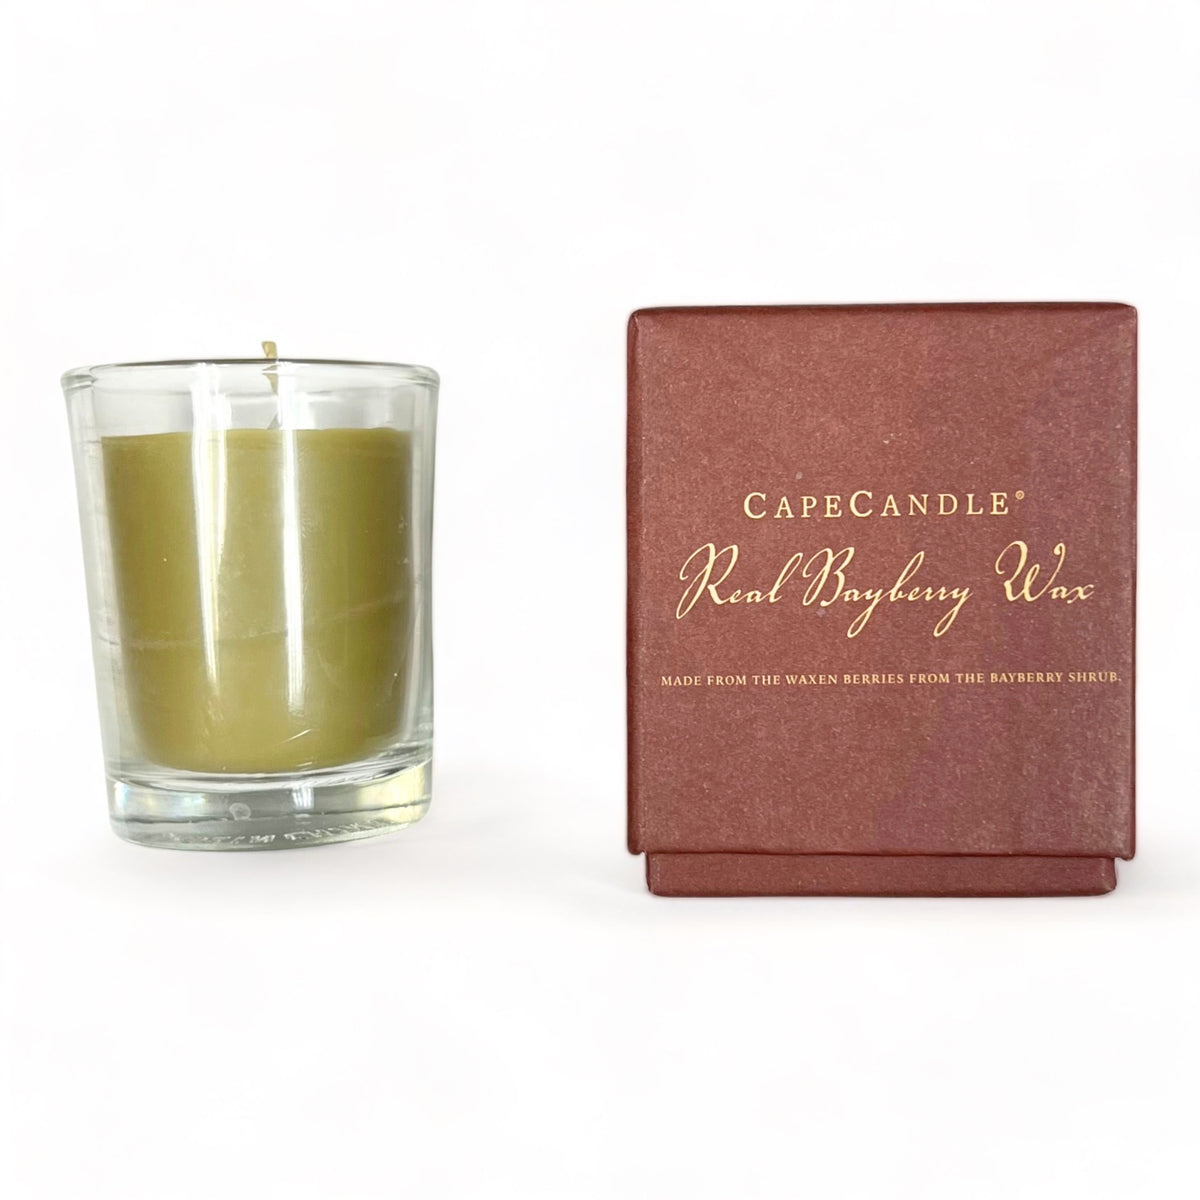 Cape Candle - Real Bayberry Wax Oversized Votive (Boxed)